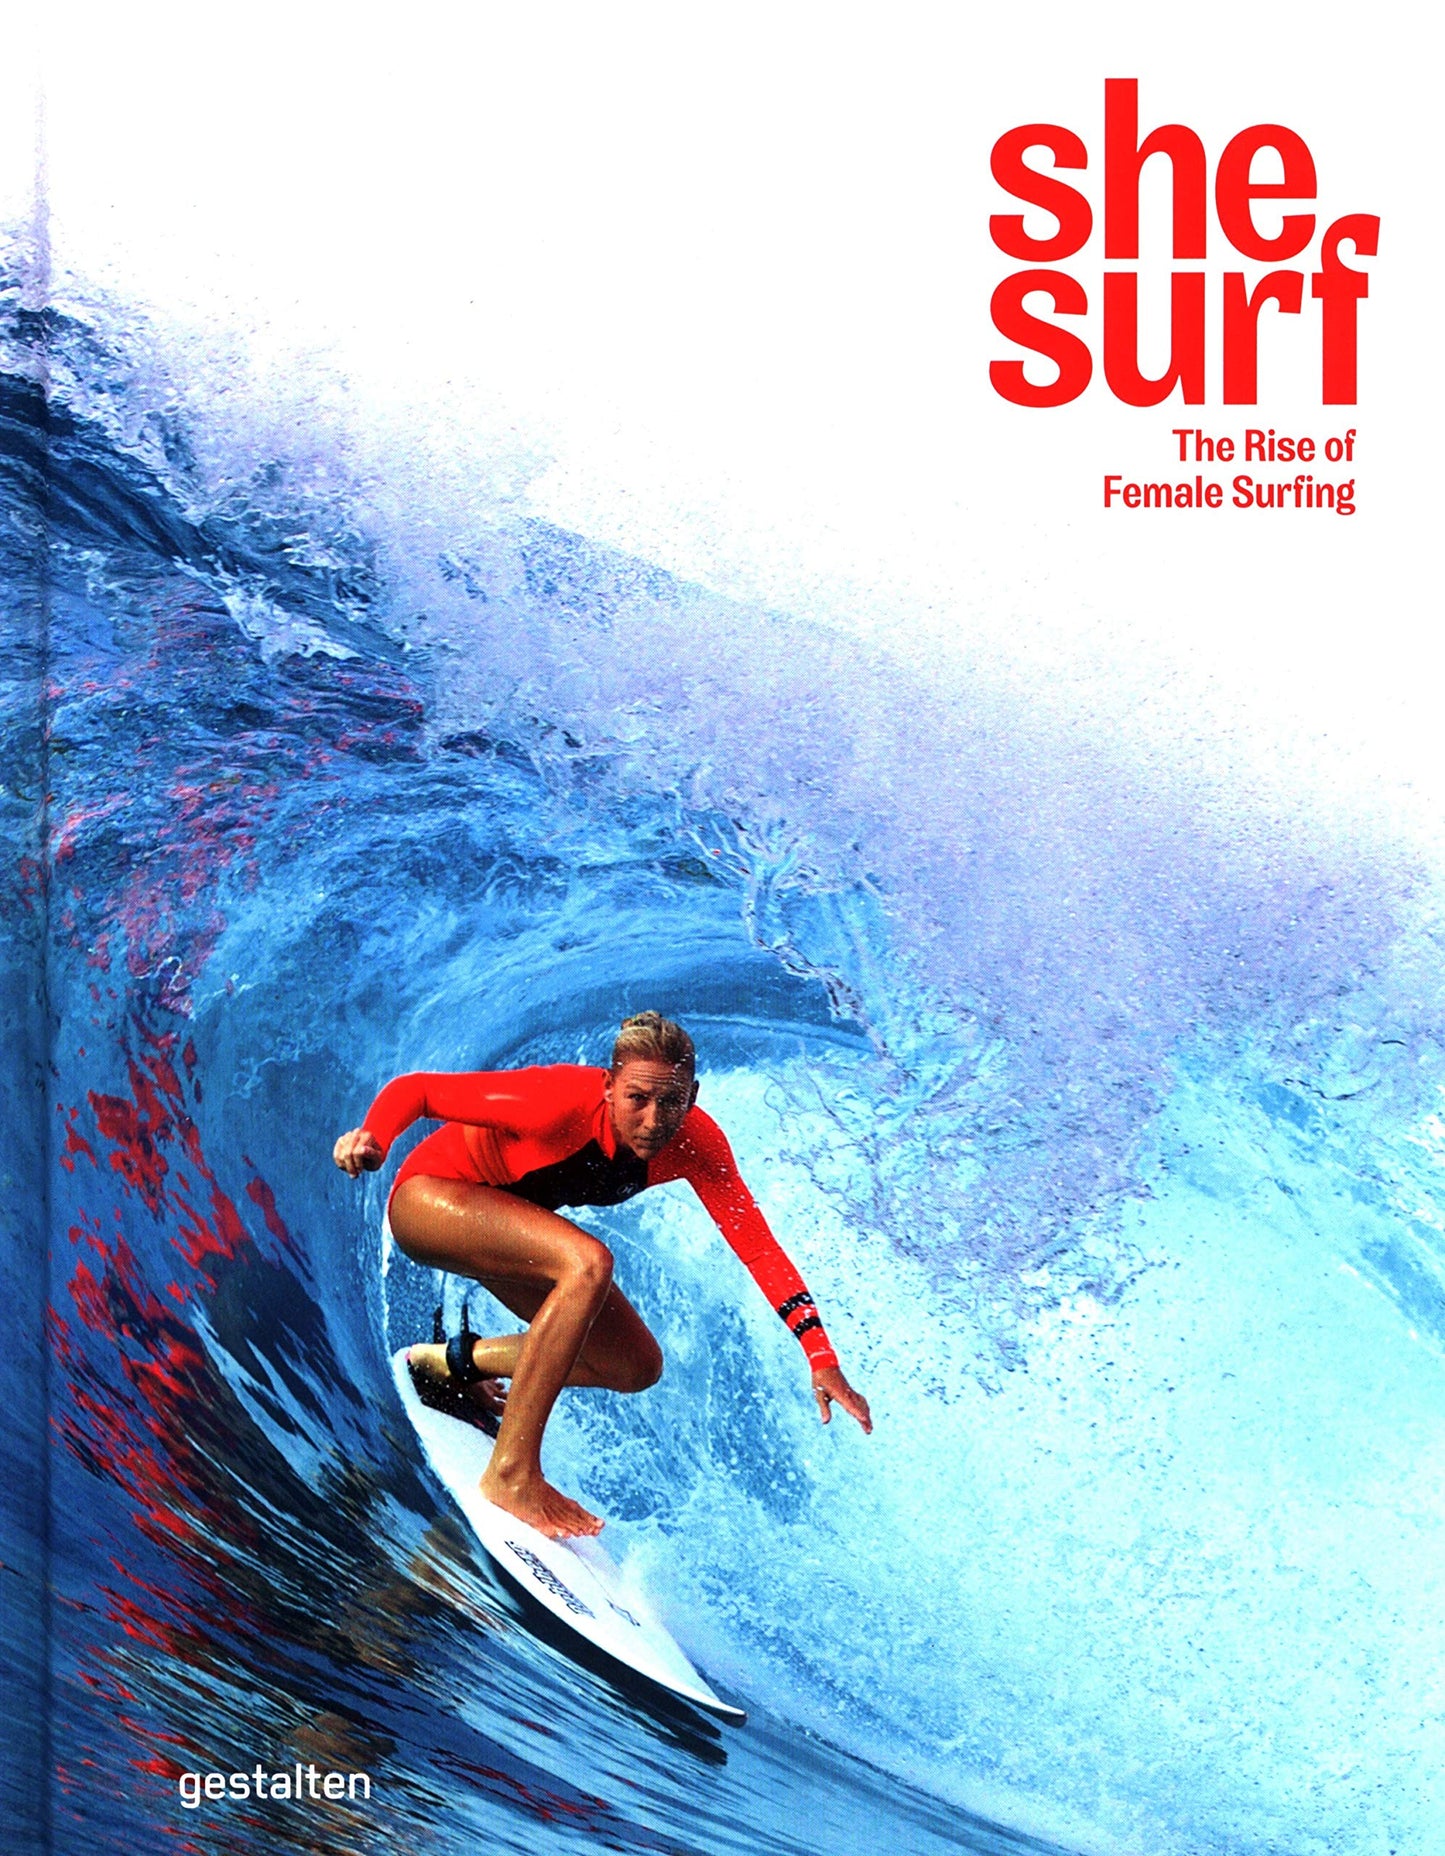 She Surf: The Rise of Female Surfing (Hardcover)